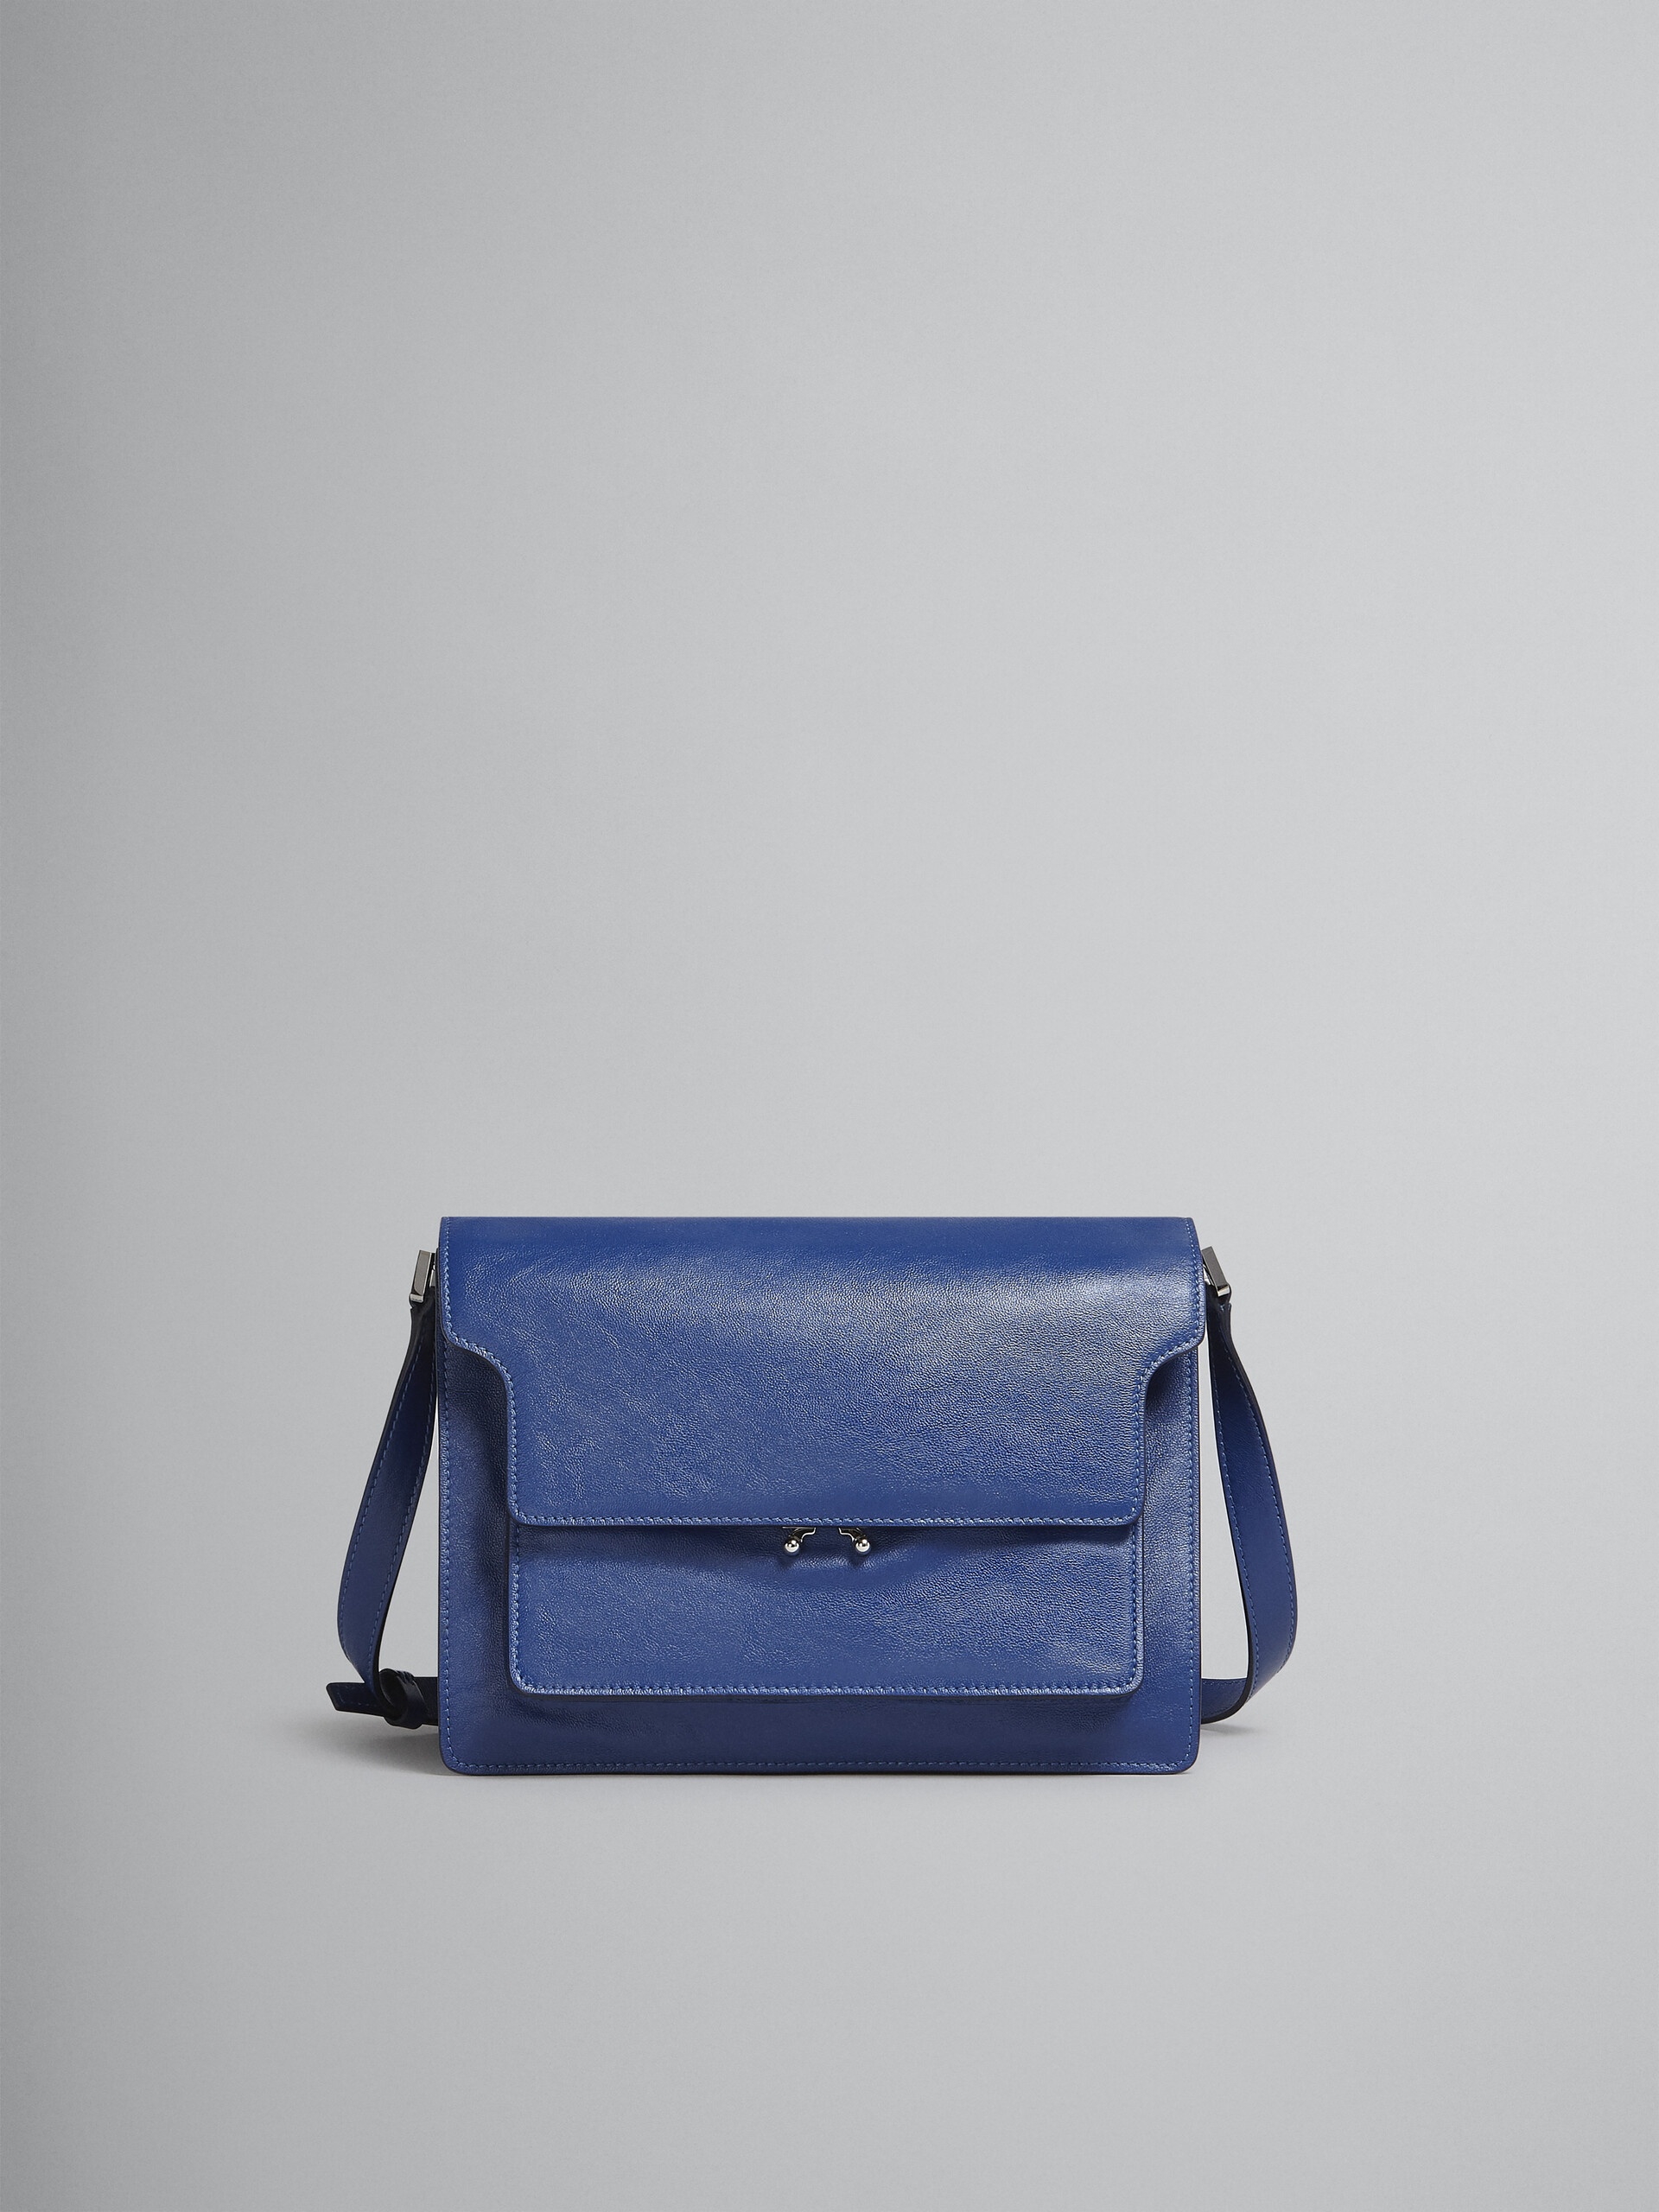 TRUNK SOFT LARGE BAG IN BLUE LEATHER - 1